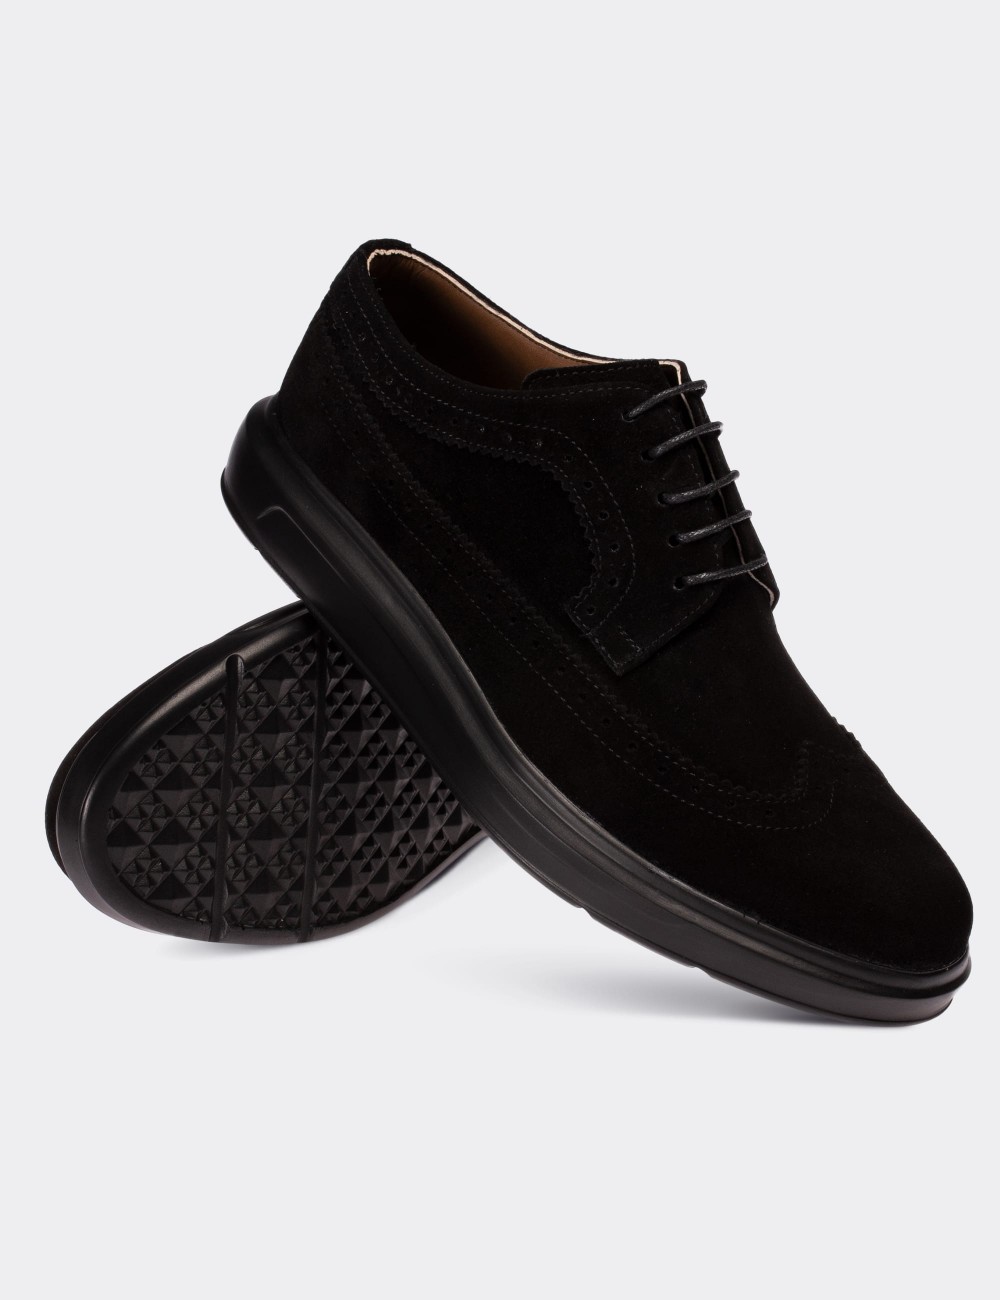 Black Suede Leather Lace-up Shoes - 01293MSYHP10